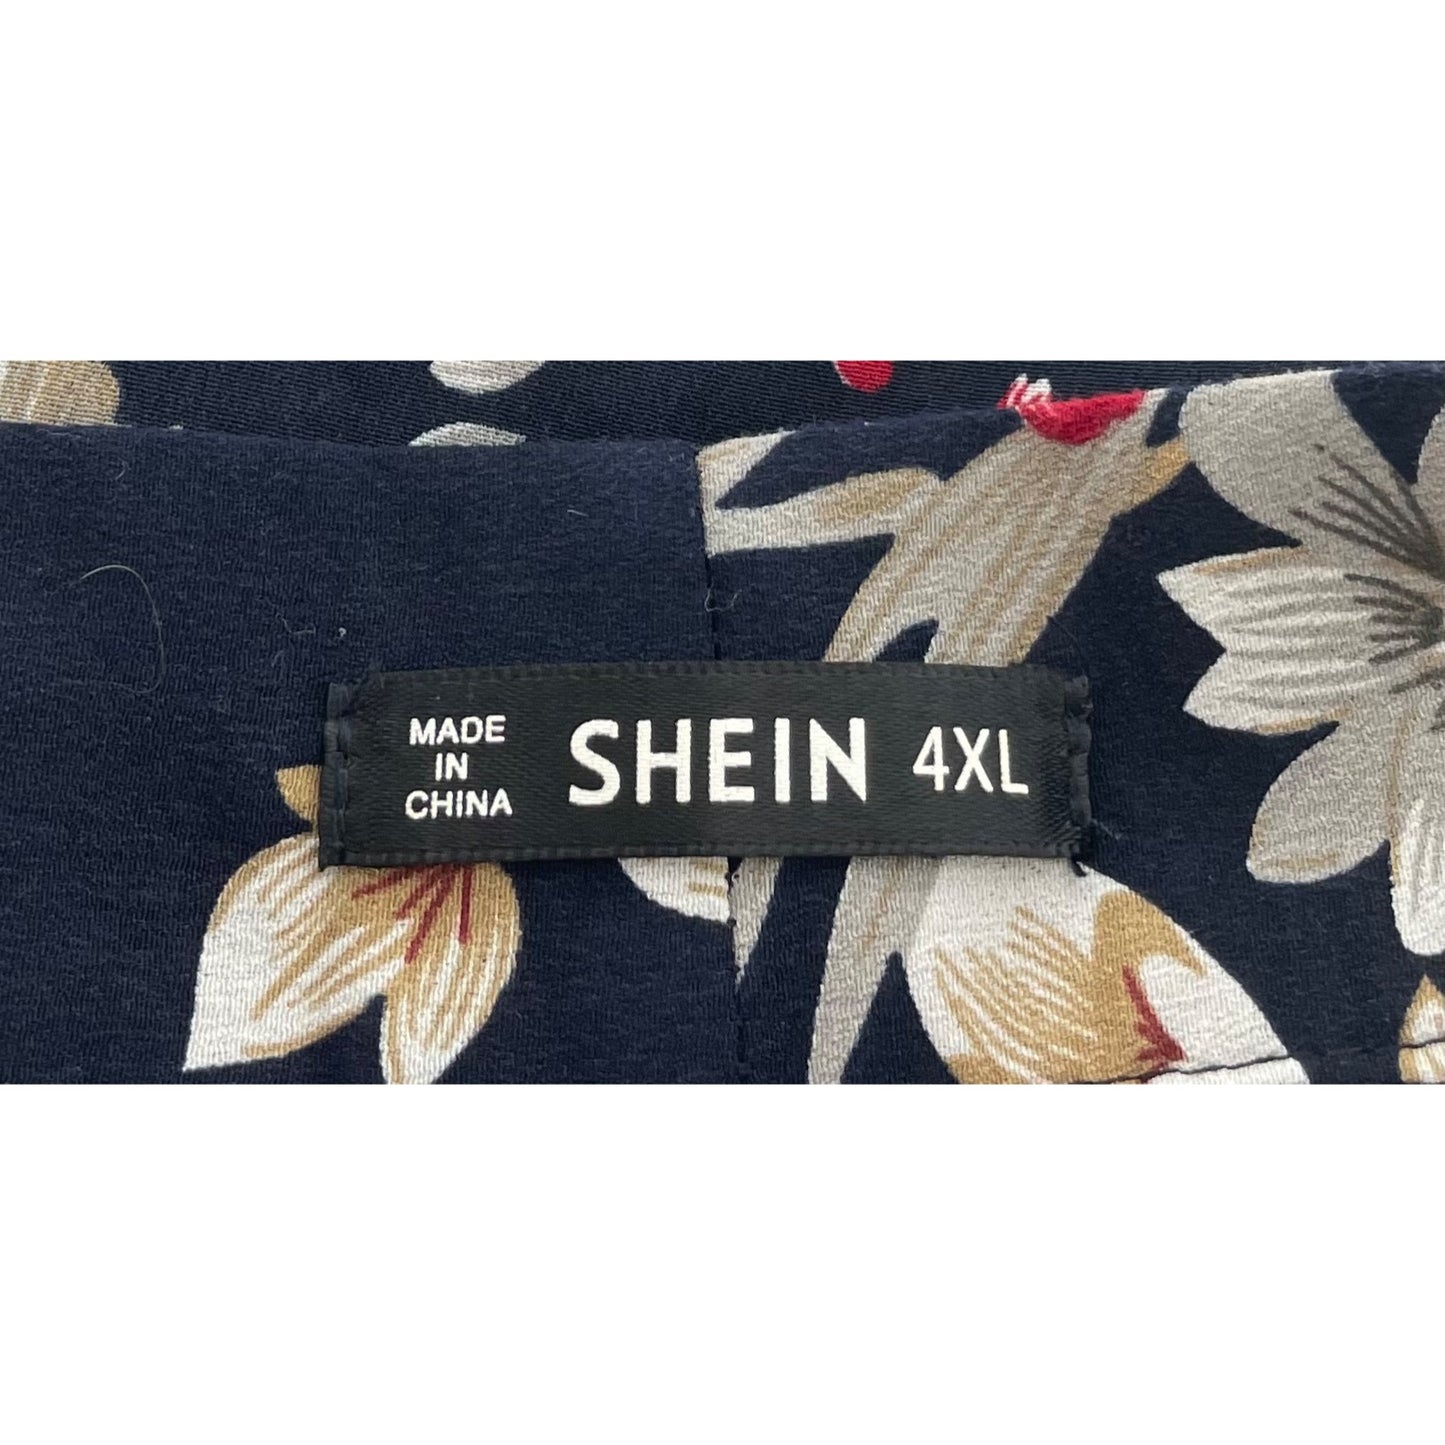 Shein 4XL Navy Blue/Multi-Colored Floral Long-Sleeved Blouse W/ Sash